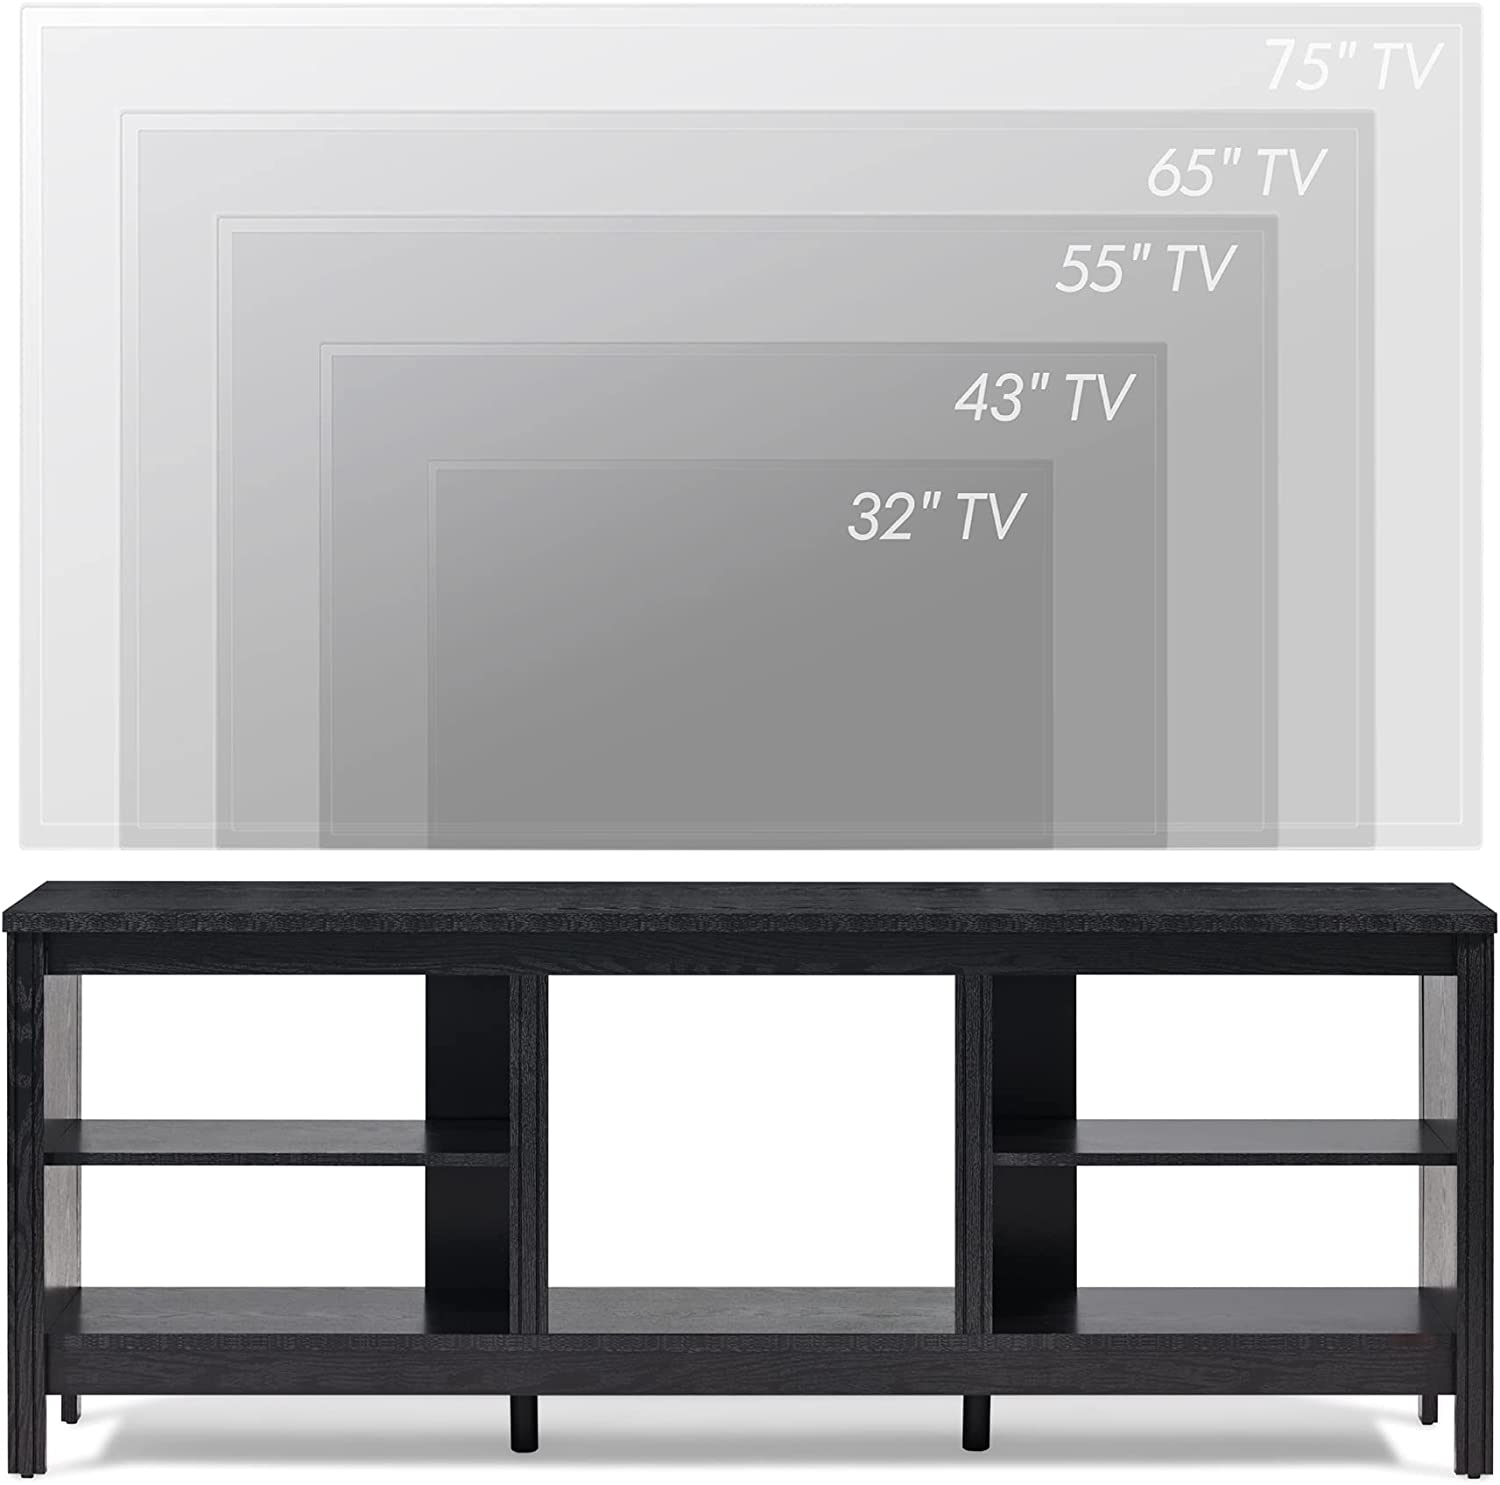 WAMPAT 70" LED TV Stand for TVs up to 80 Inches, Black Entertainment Center for 75 Inch TV